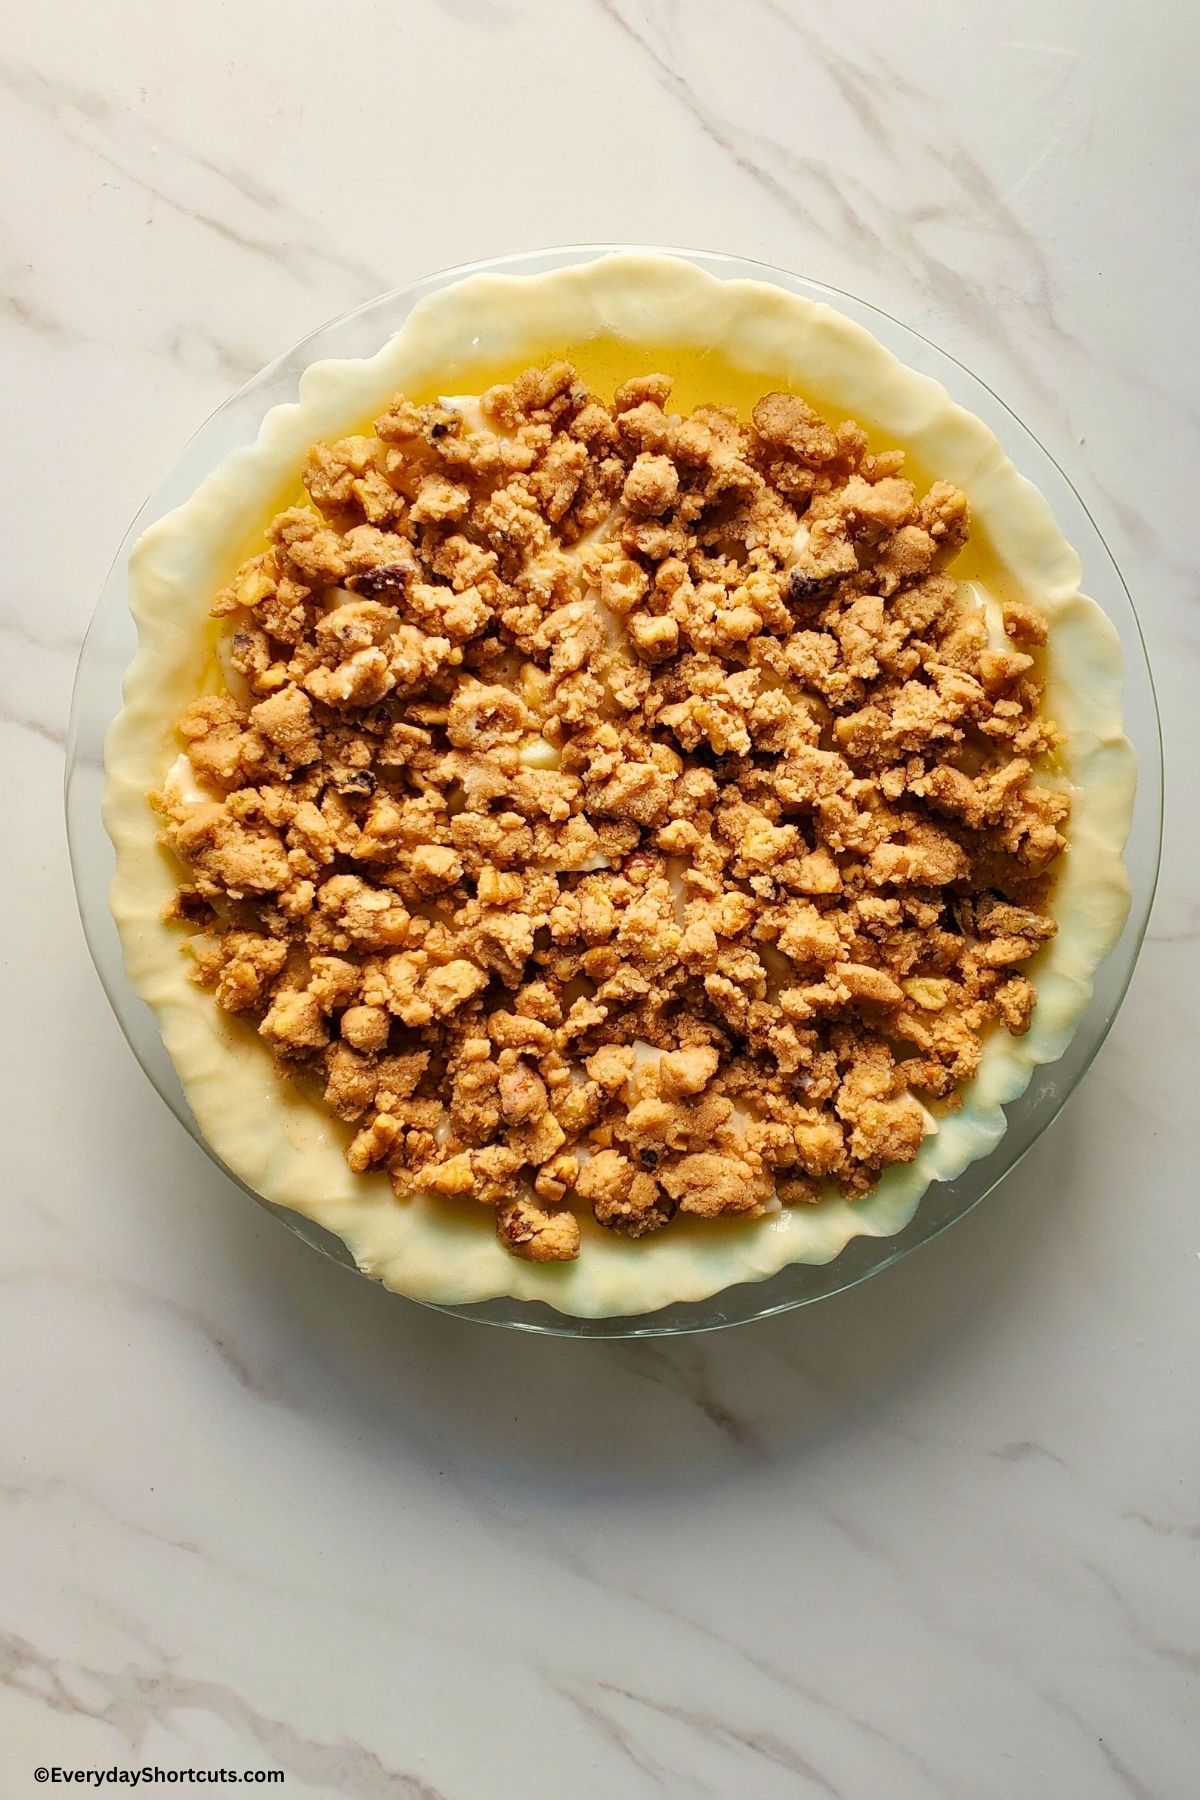 apples and walnut streusel in a pie crust